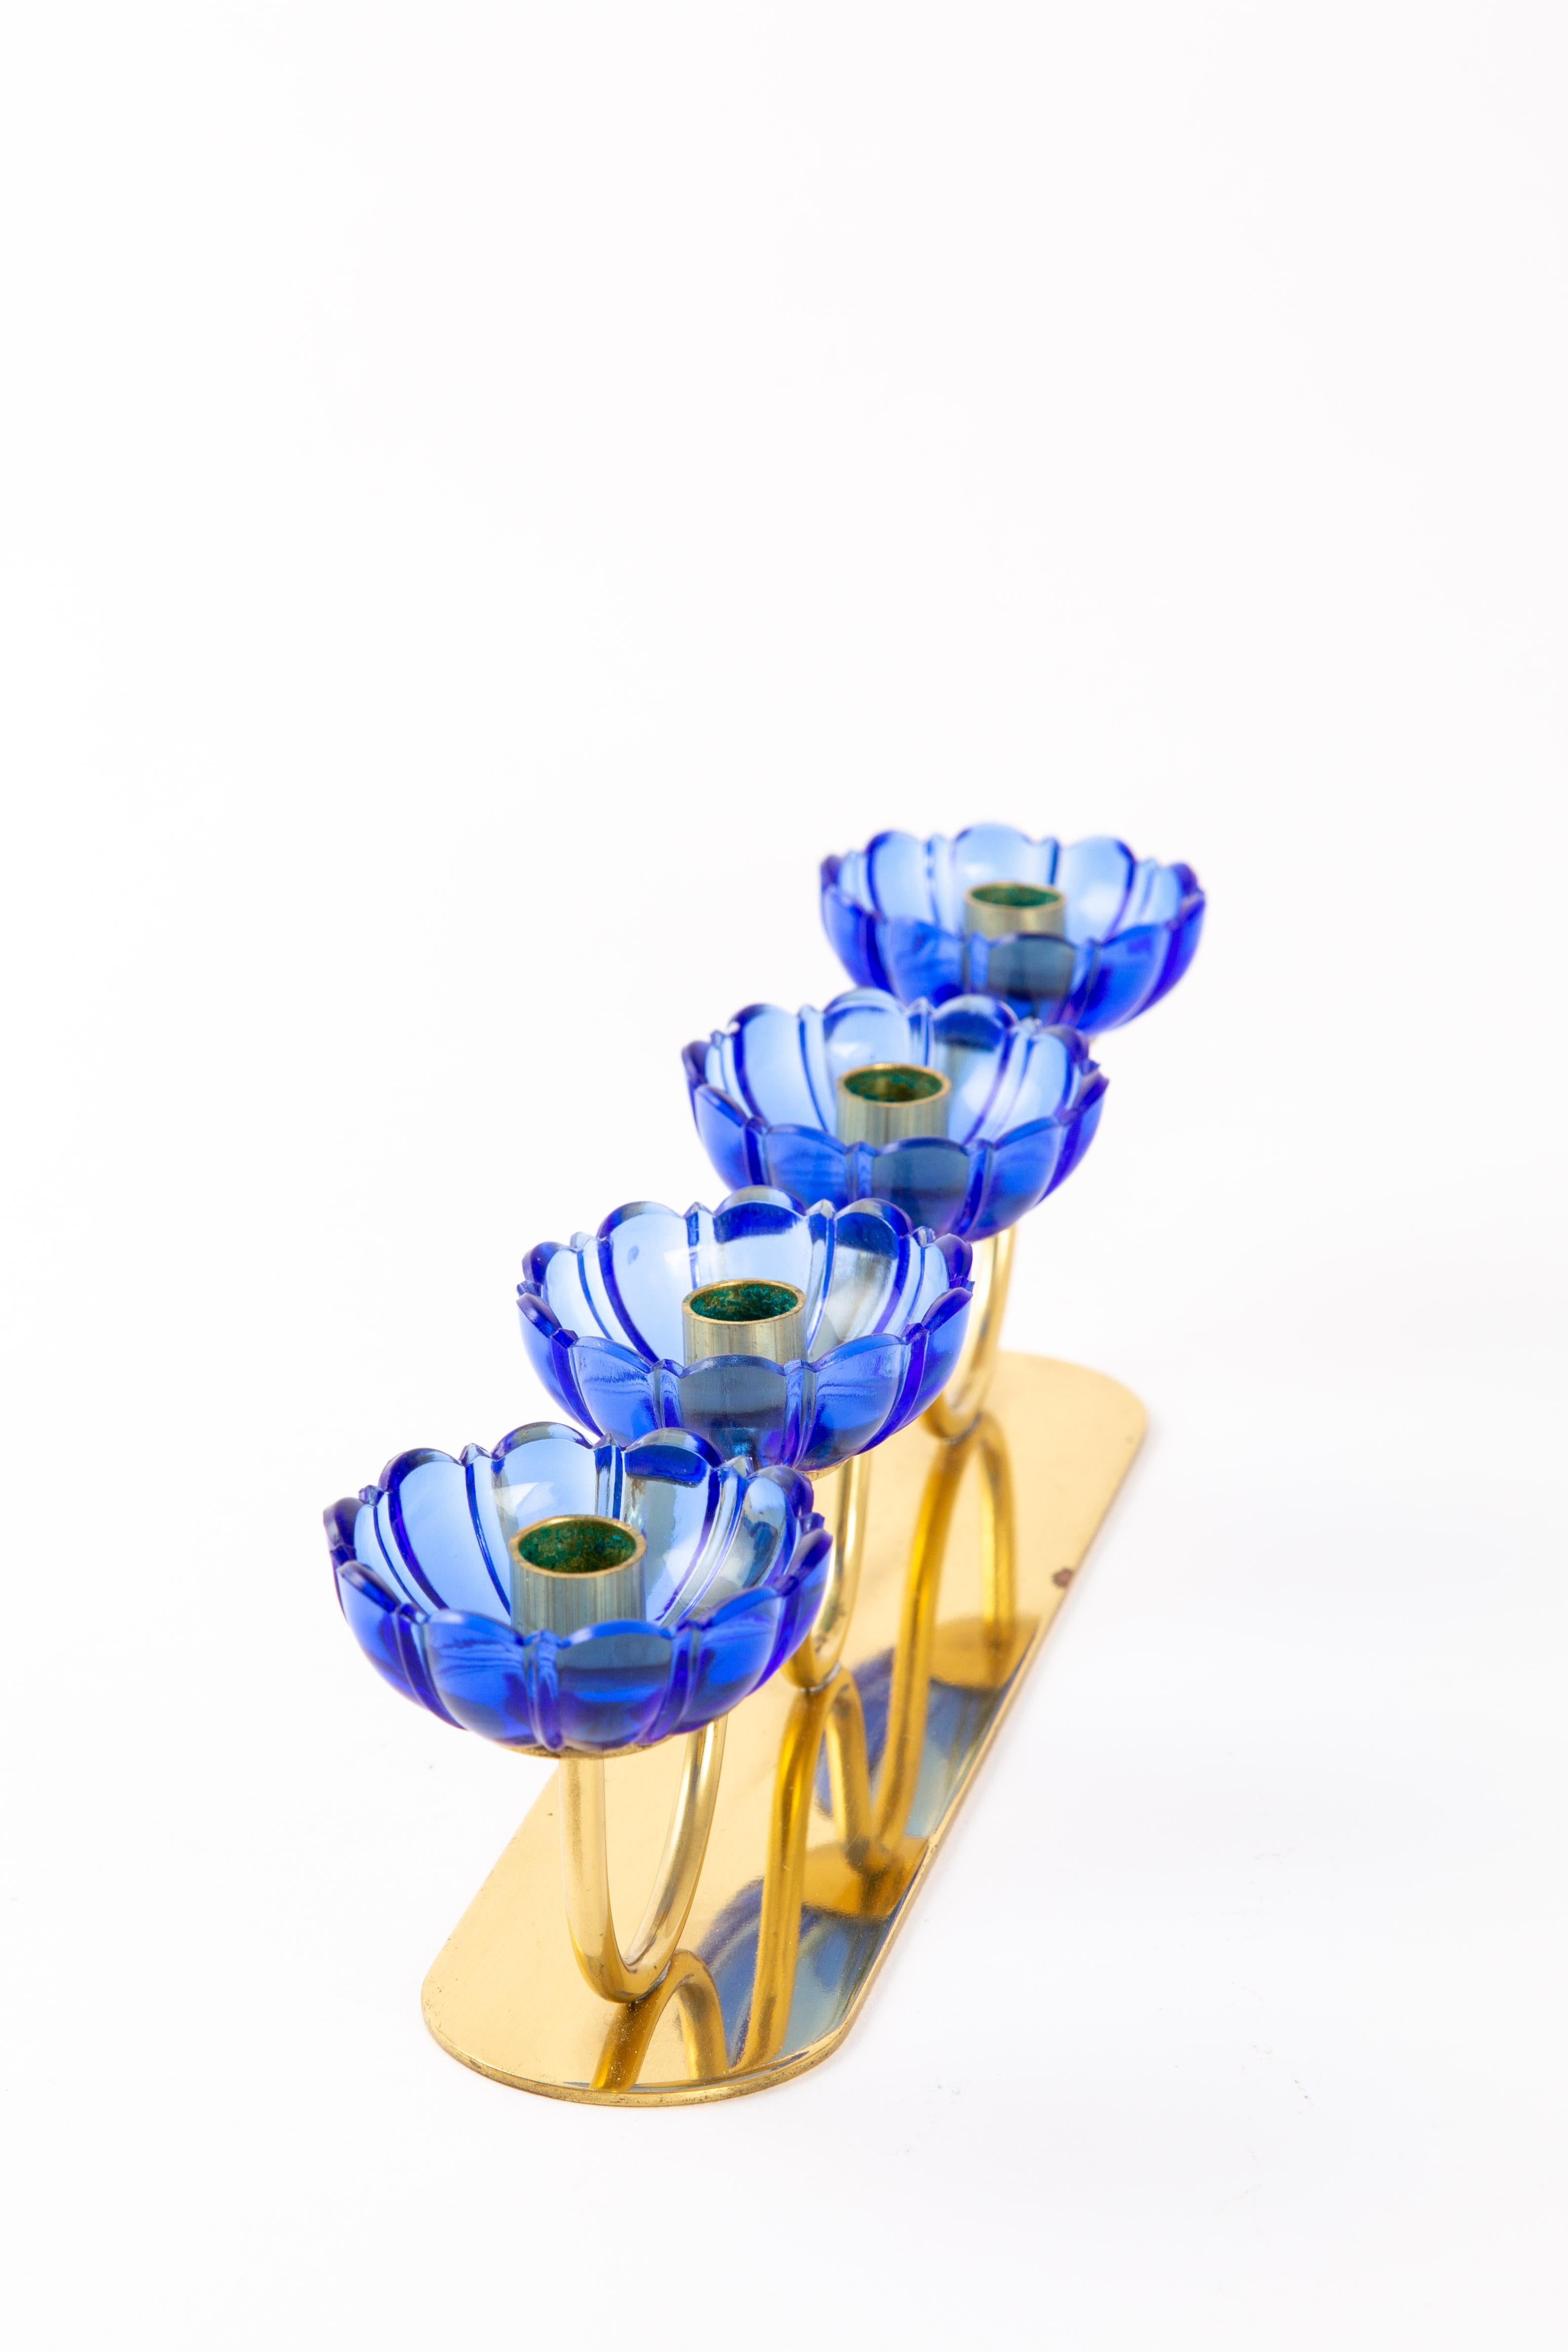 Gunnar Ander Candleholders Sweden for Ystad Metall, Blue Flower with Brass For Sale 7